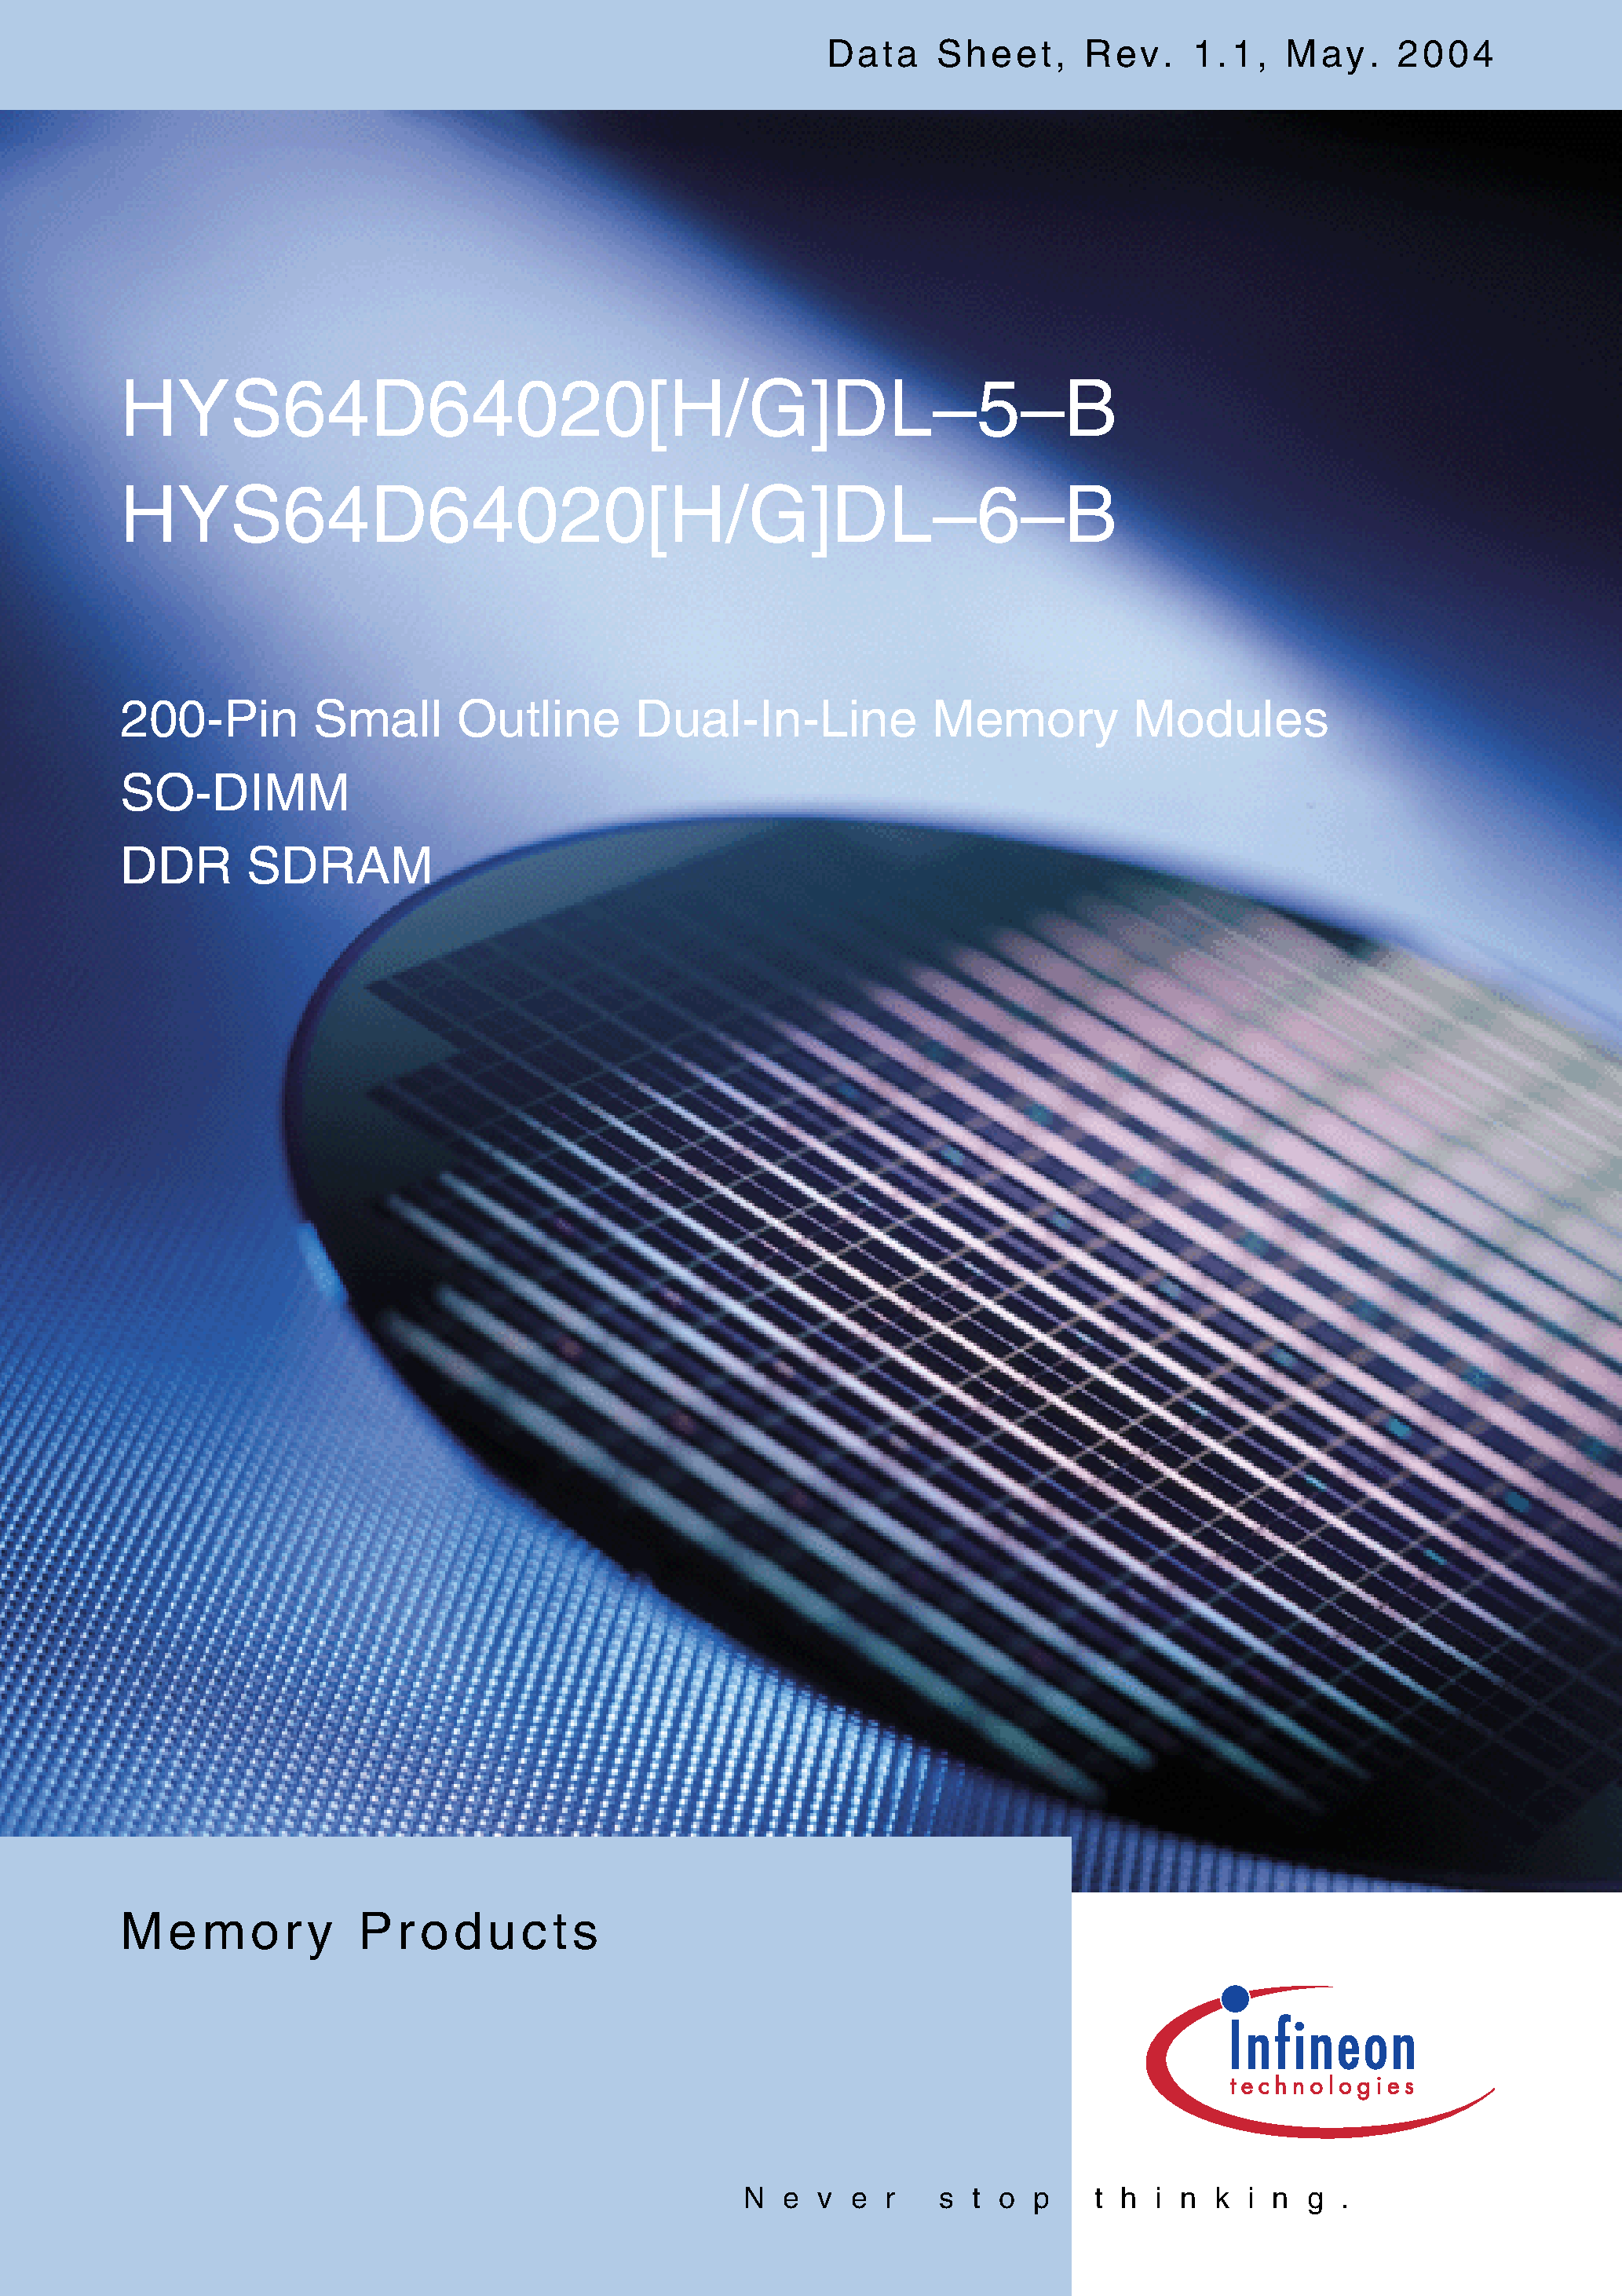 Даташит HYS64D64020HDL-6-B - 200-Pin Small Outline Dual-In-Line Memory Modules страница 1